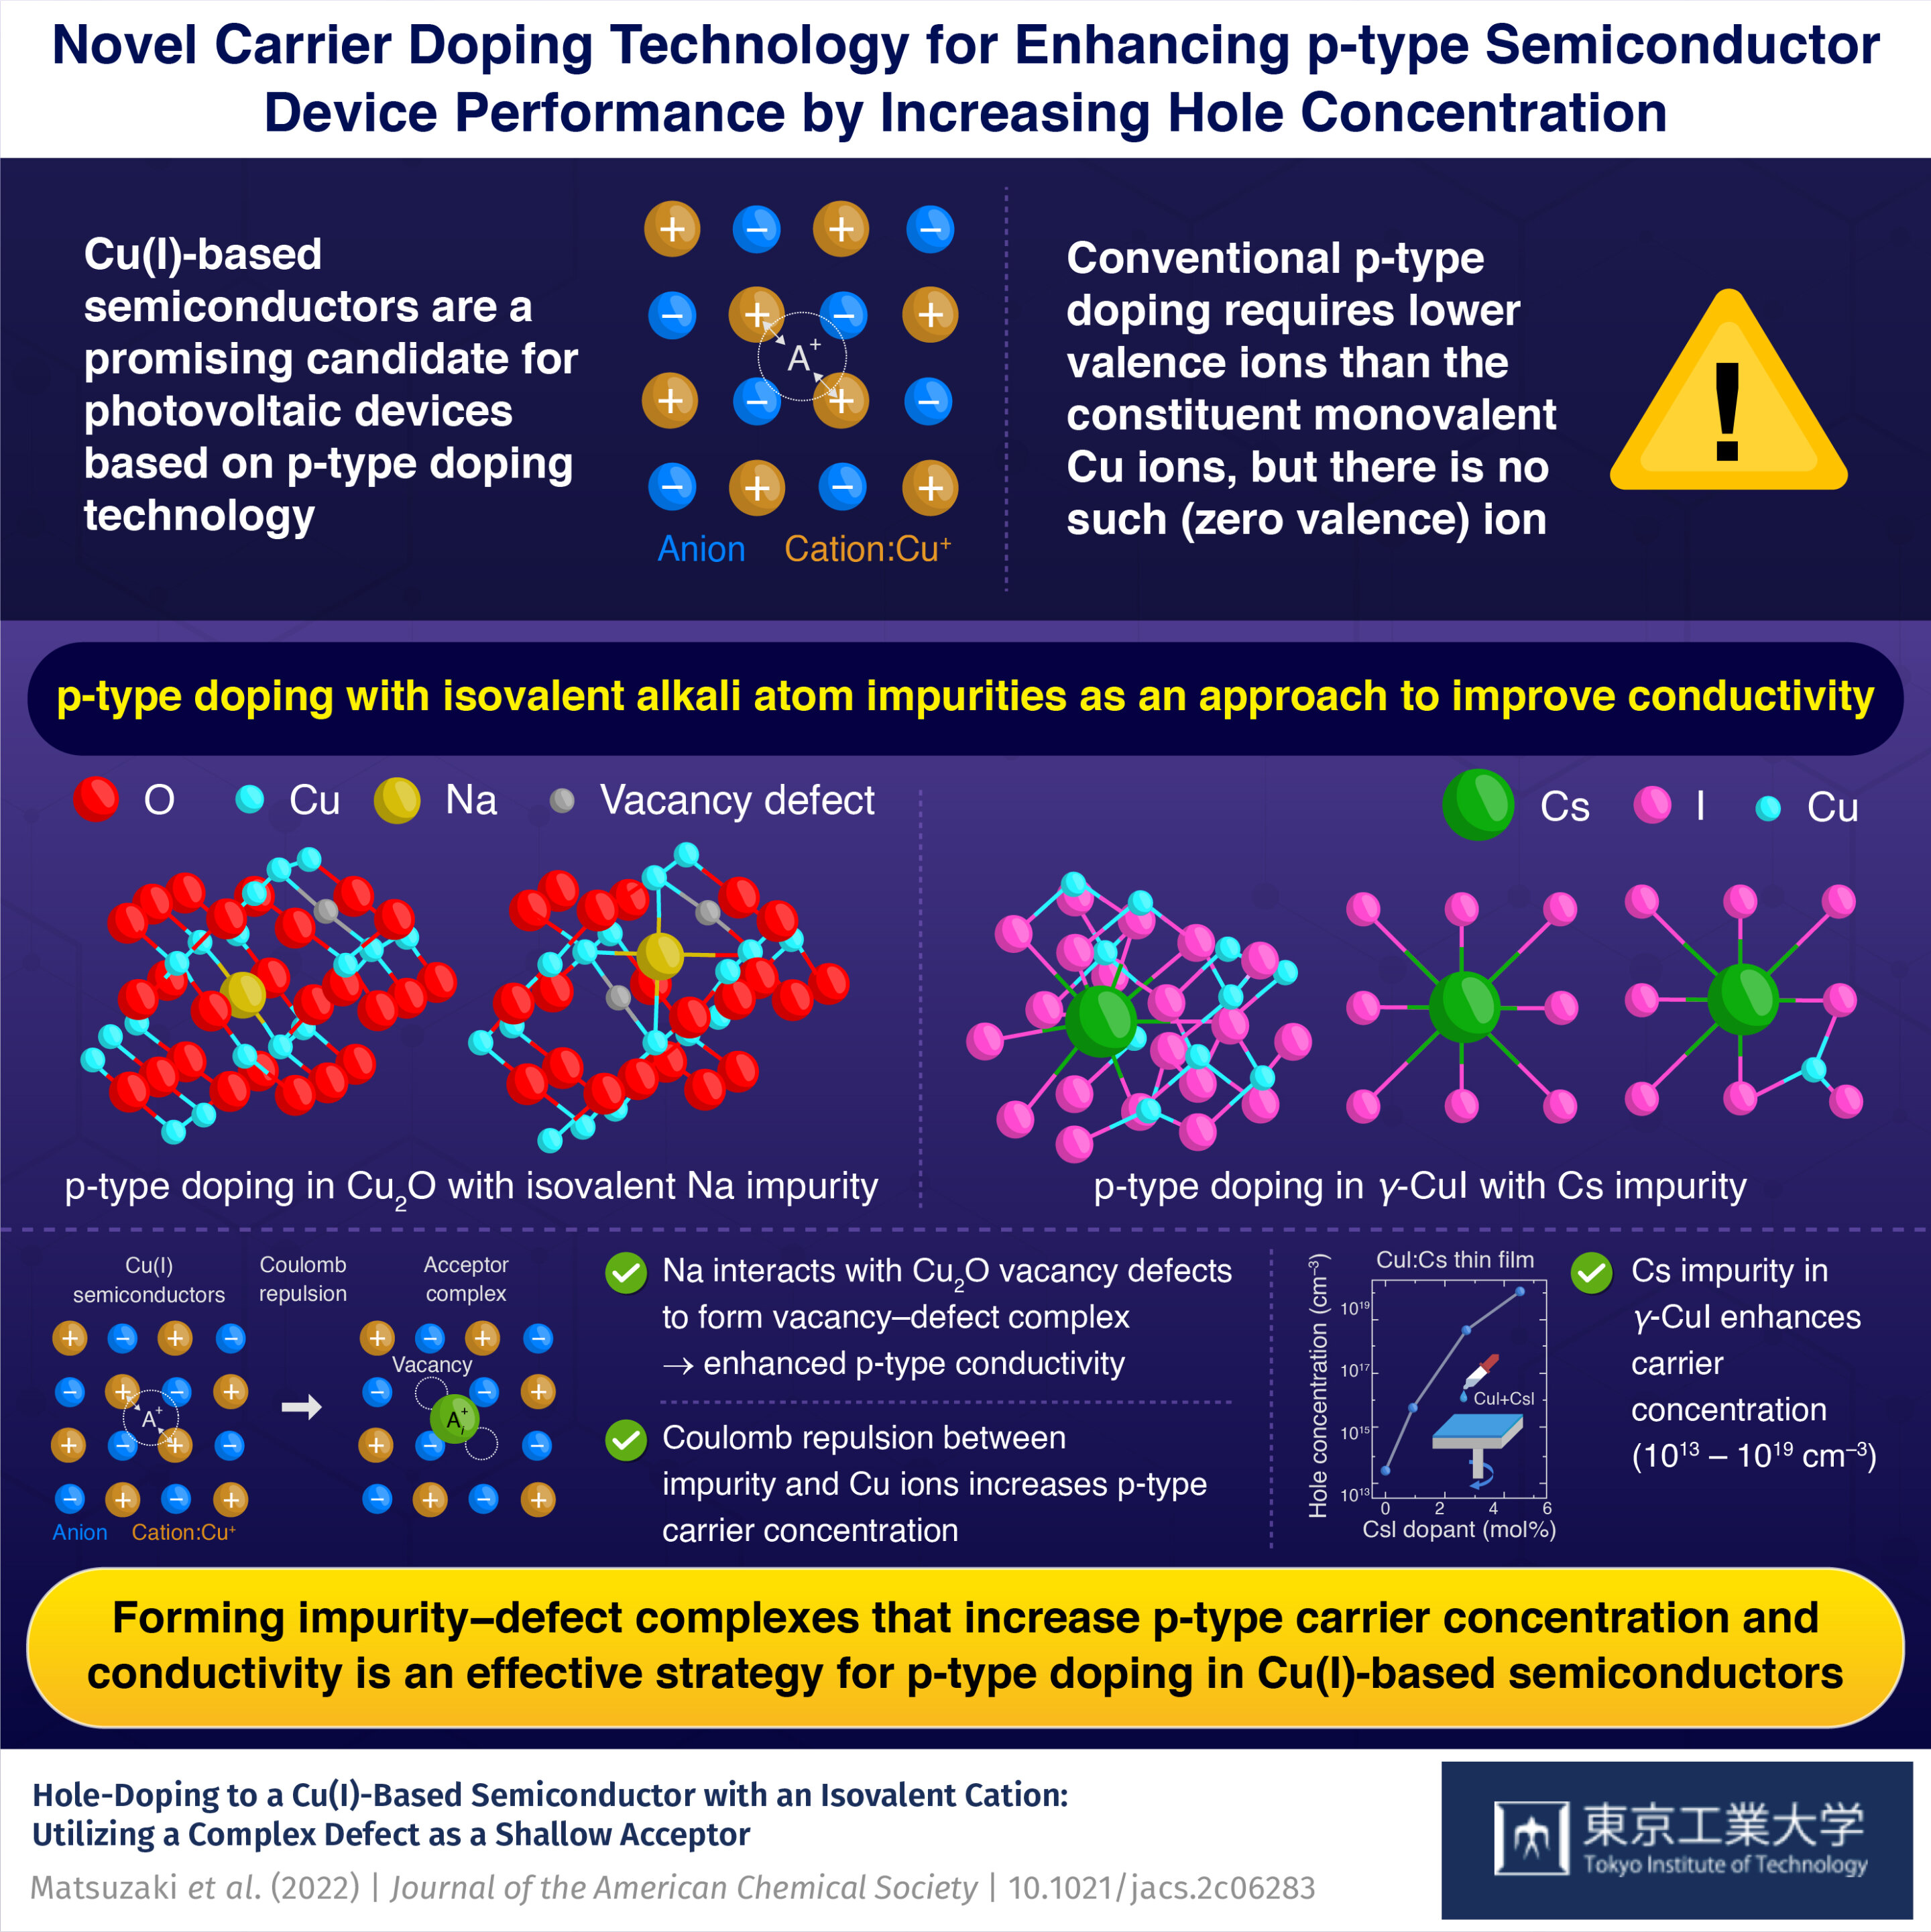 Novel carrier doping in p-type semiconductors enhances photovoltaic device performance by increasing hole concentration